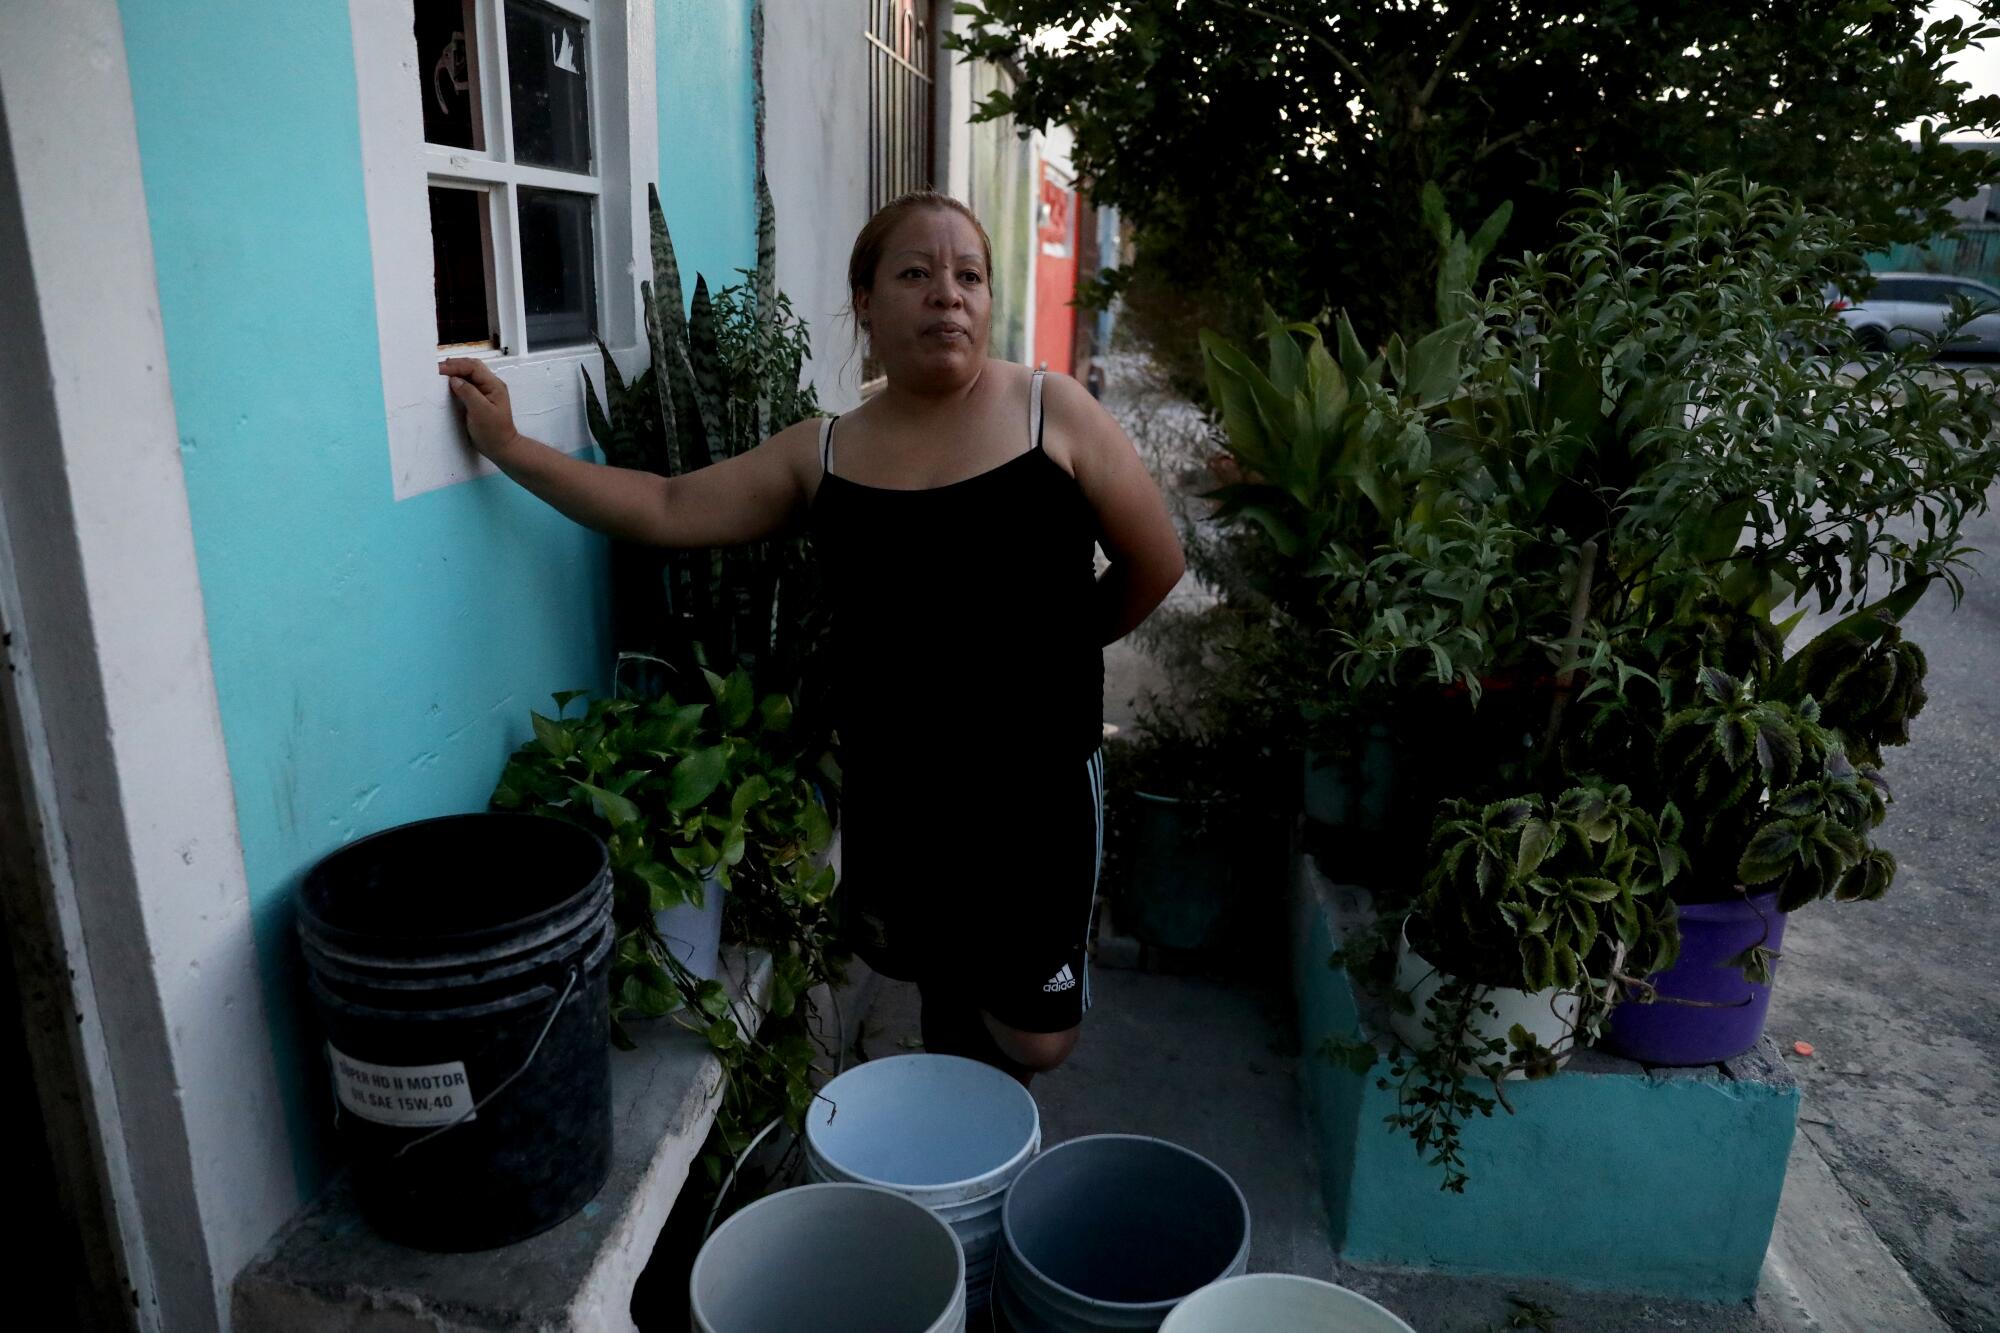 A woman stands in a small garden with several buckets.